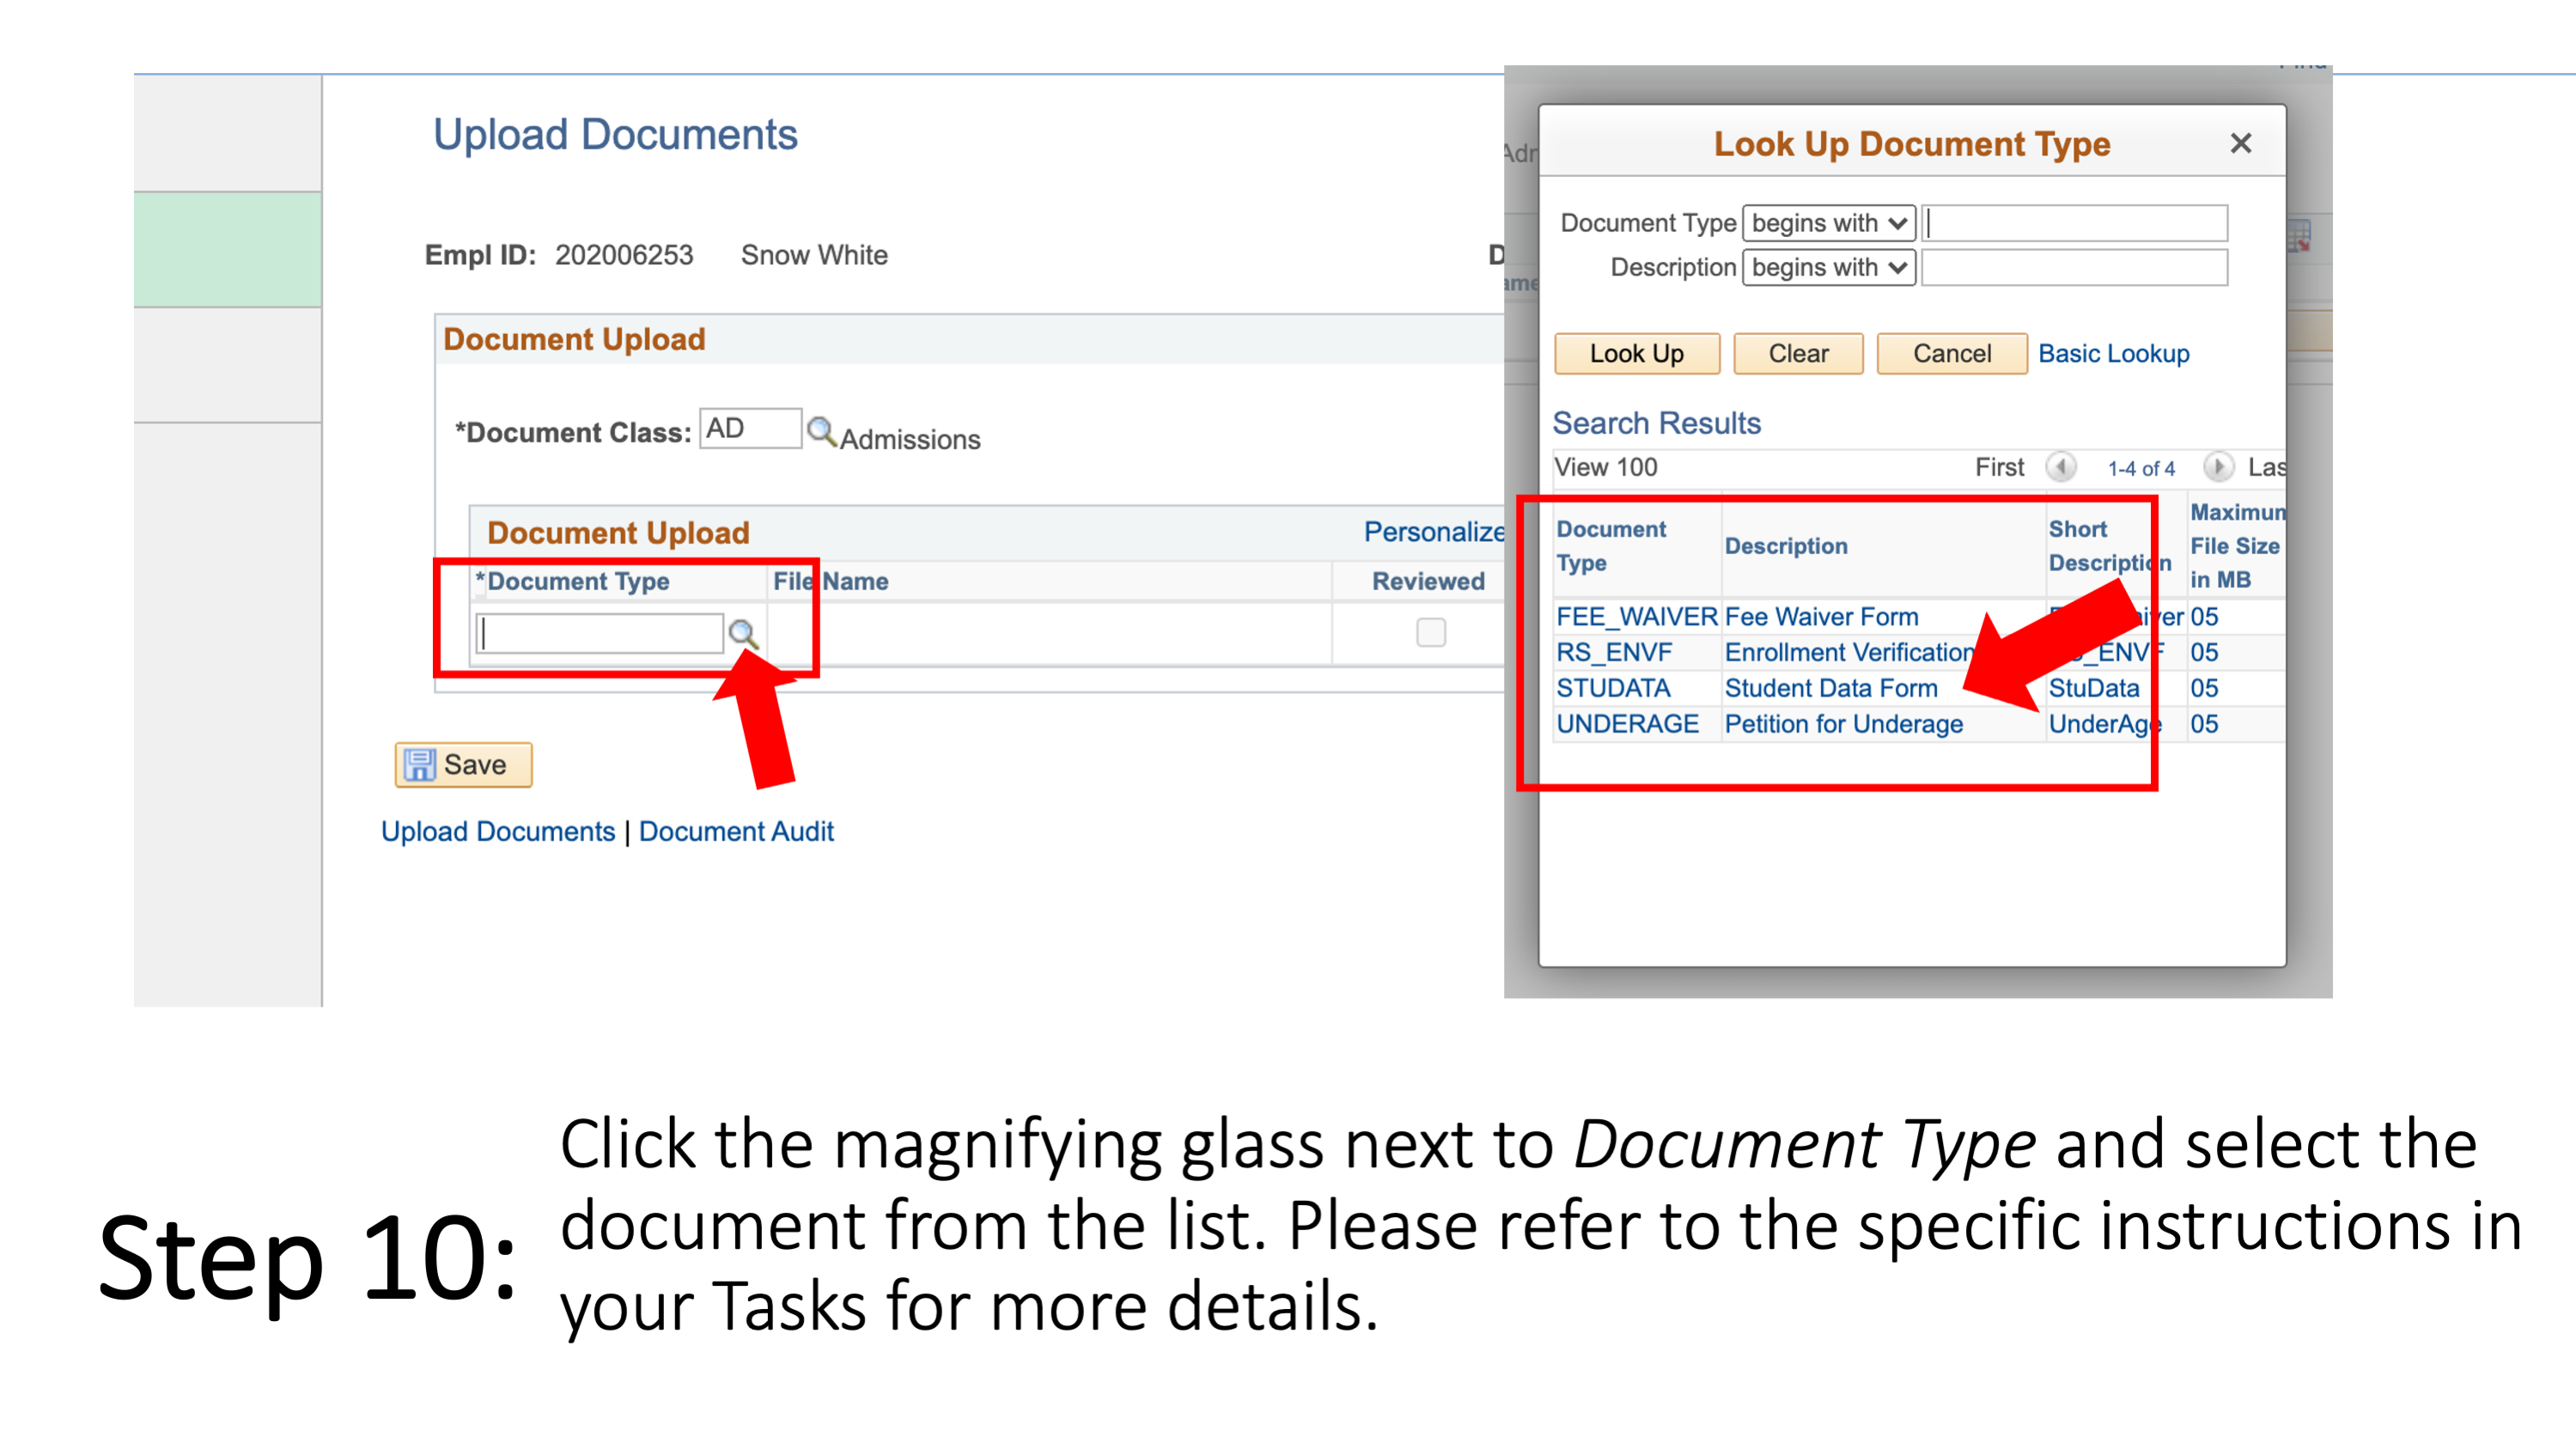 Slide 11 - Step 10: Click the magnifying glass next to Document Type and select the document from the list. Please refer to the specific instructions in your Tasks for more details. 